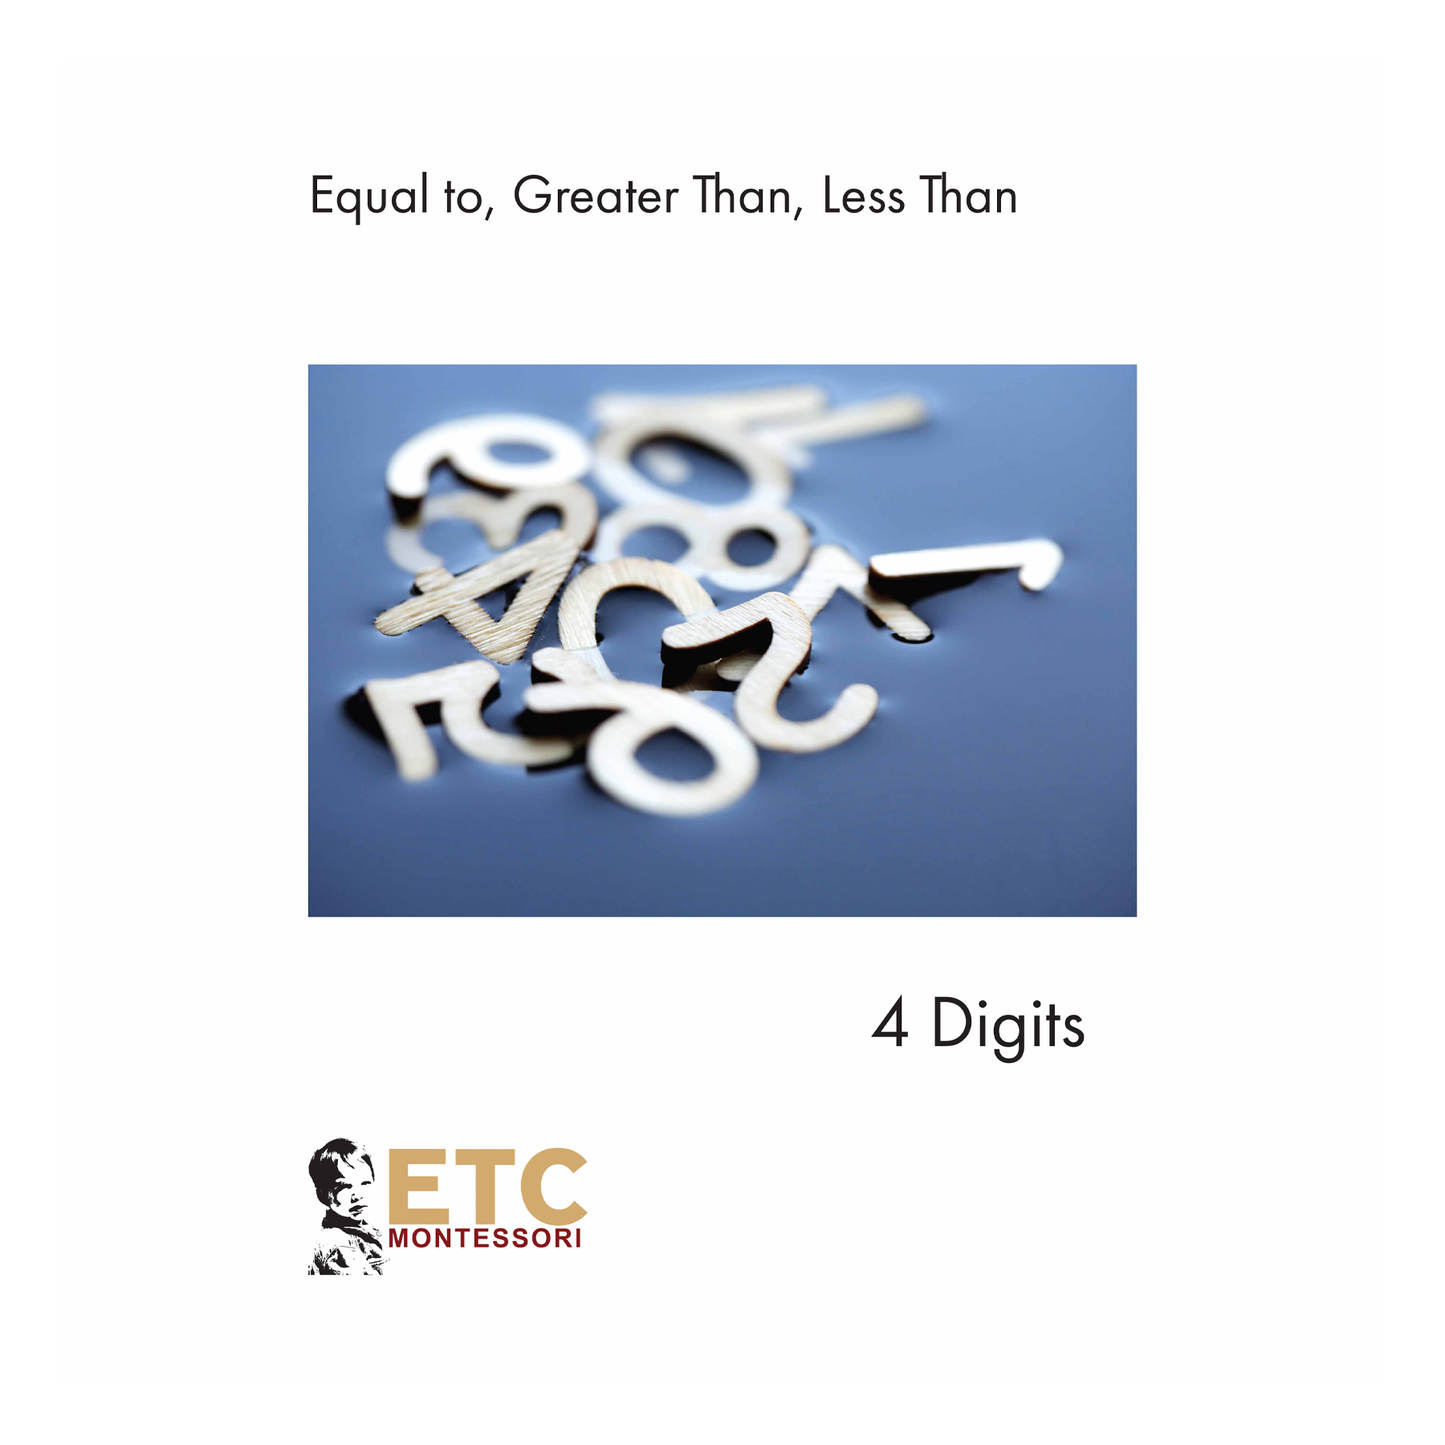 Equal,Greater,Less than (Up to 4 Digits) - Nienhuis AMI